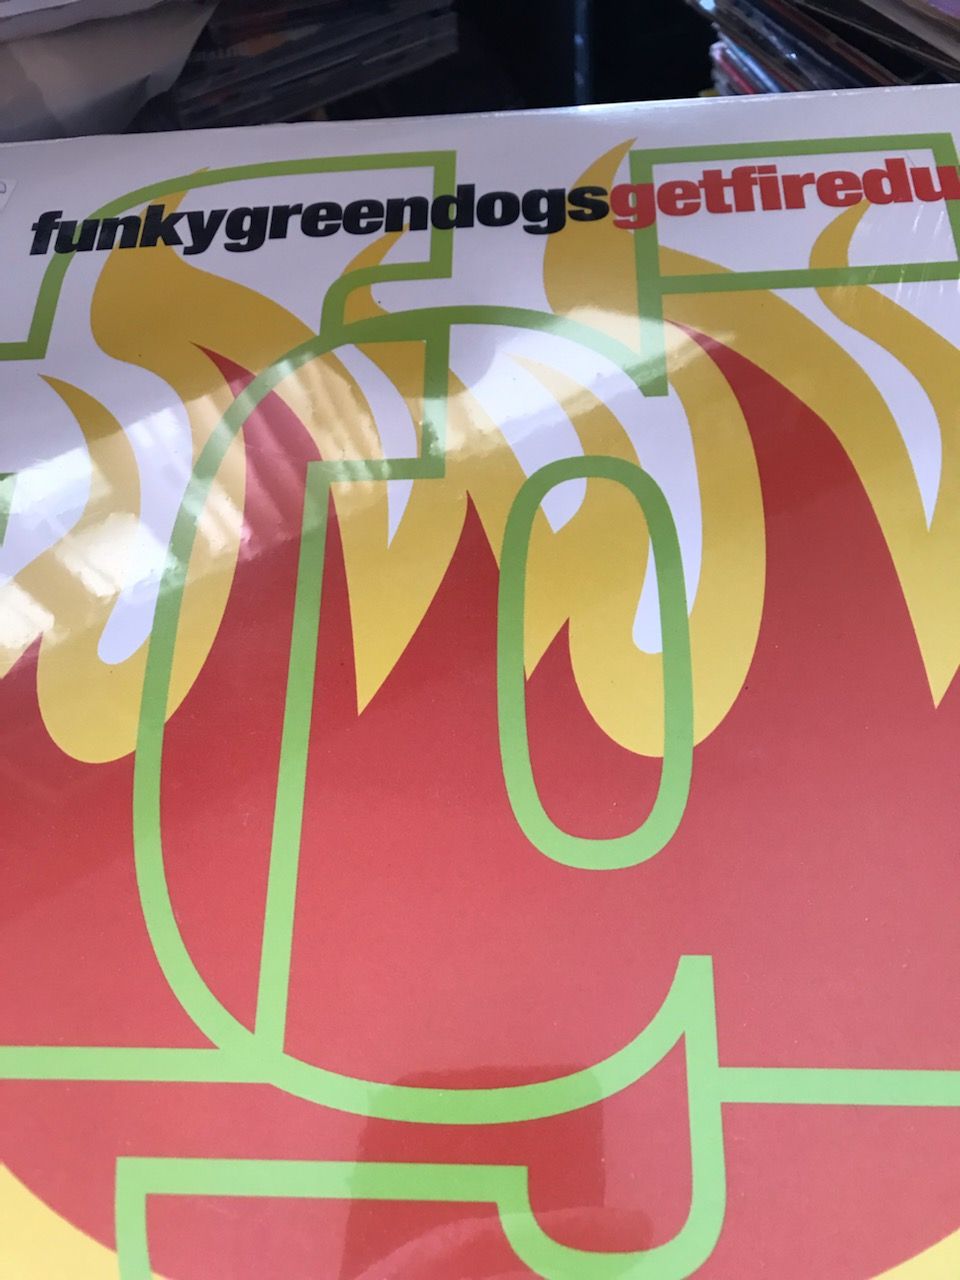 Funky Green Dogs - Get Fired Up (2 X LP) Funky Green Do...